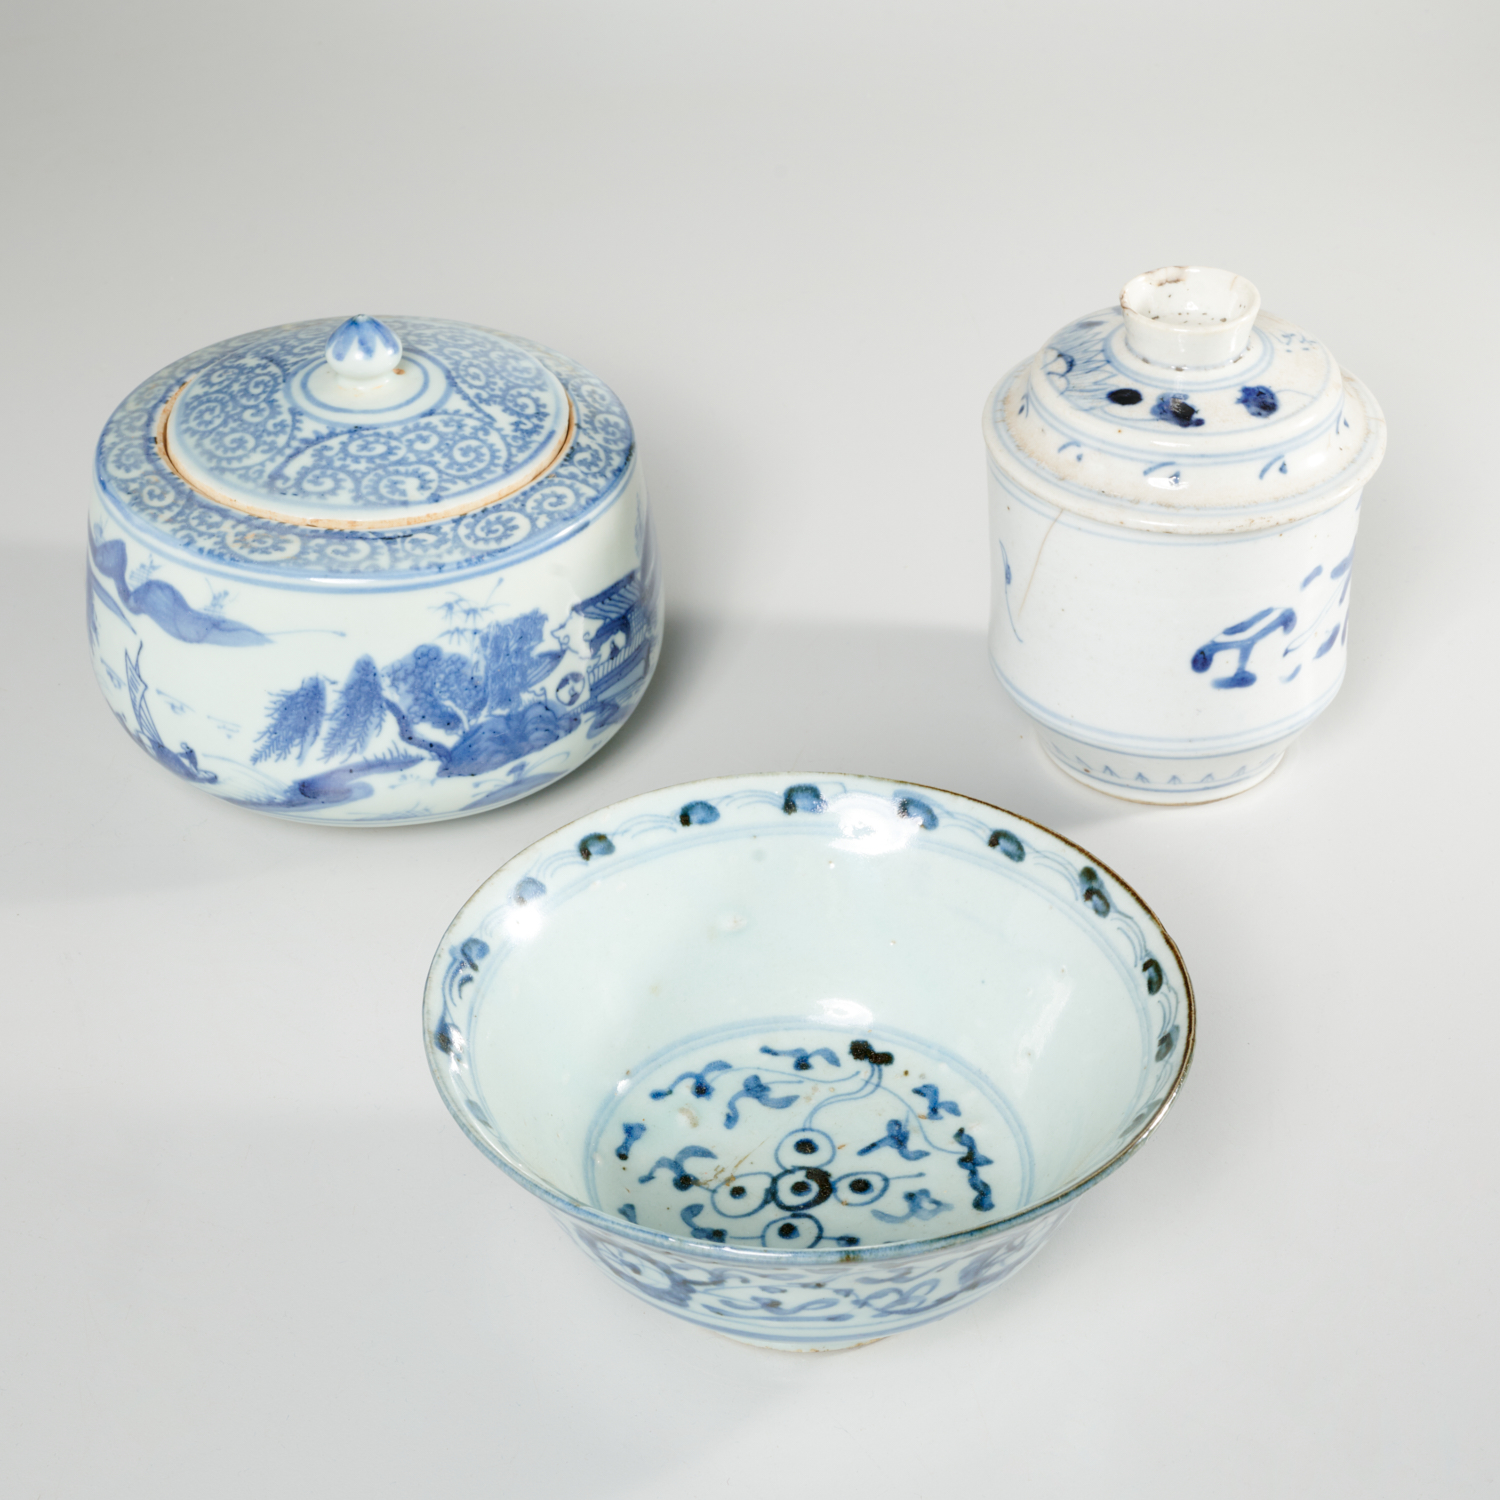  3 CHINESE BLUE AND WHITE PORCELAINS 3616d0